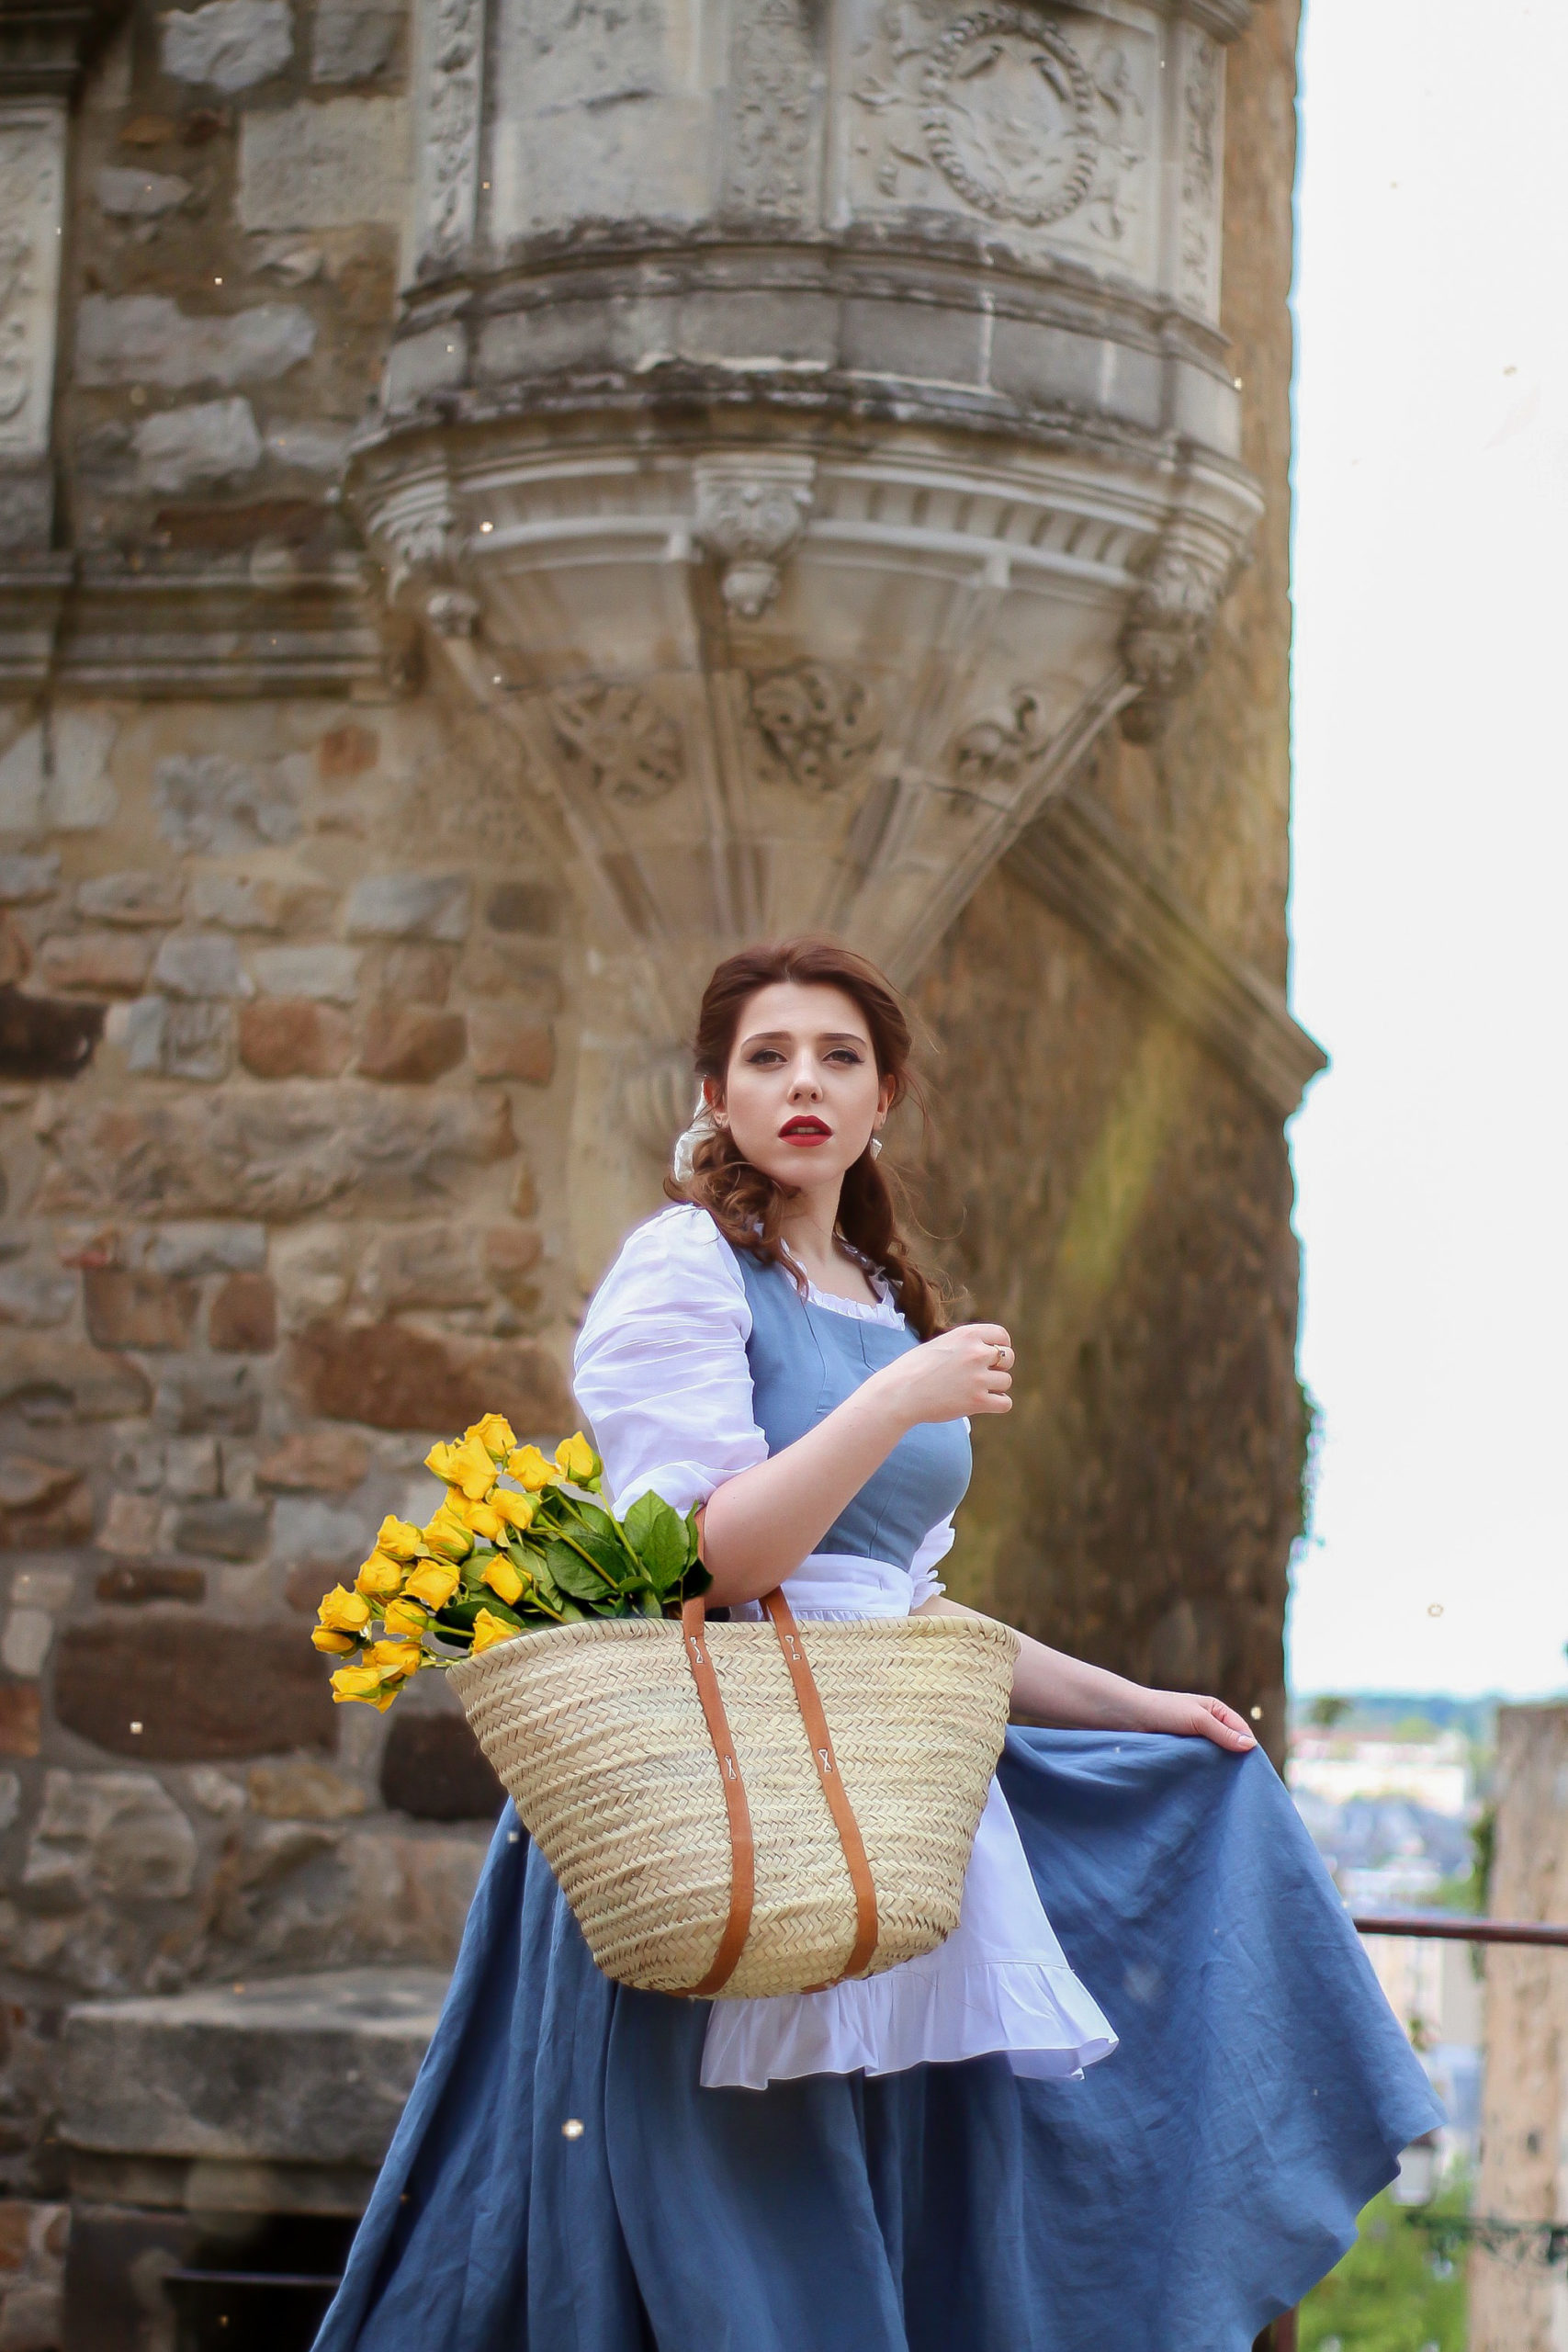 MON COSPLAY DE BELLE / BEAUTY AND THE BEAST